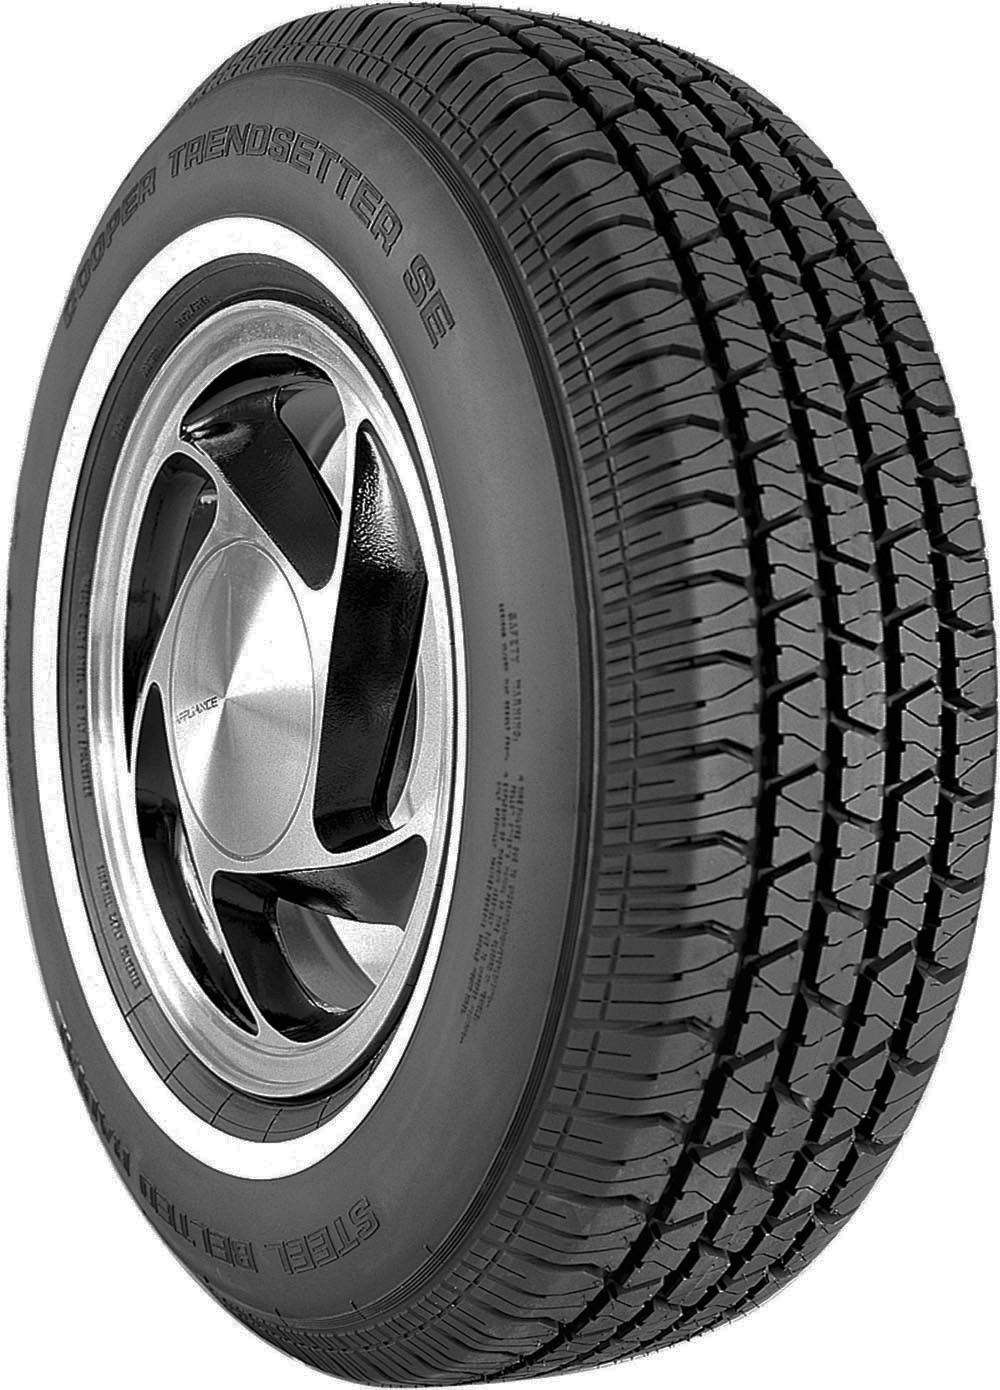 Anvelope jeep COOPER TRENDSETTER SE WSW 235/75 R15 105S